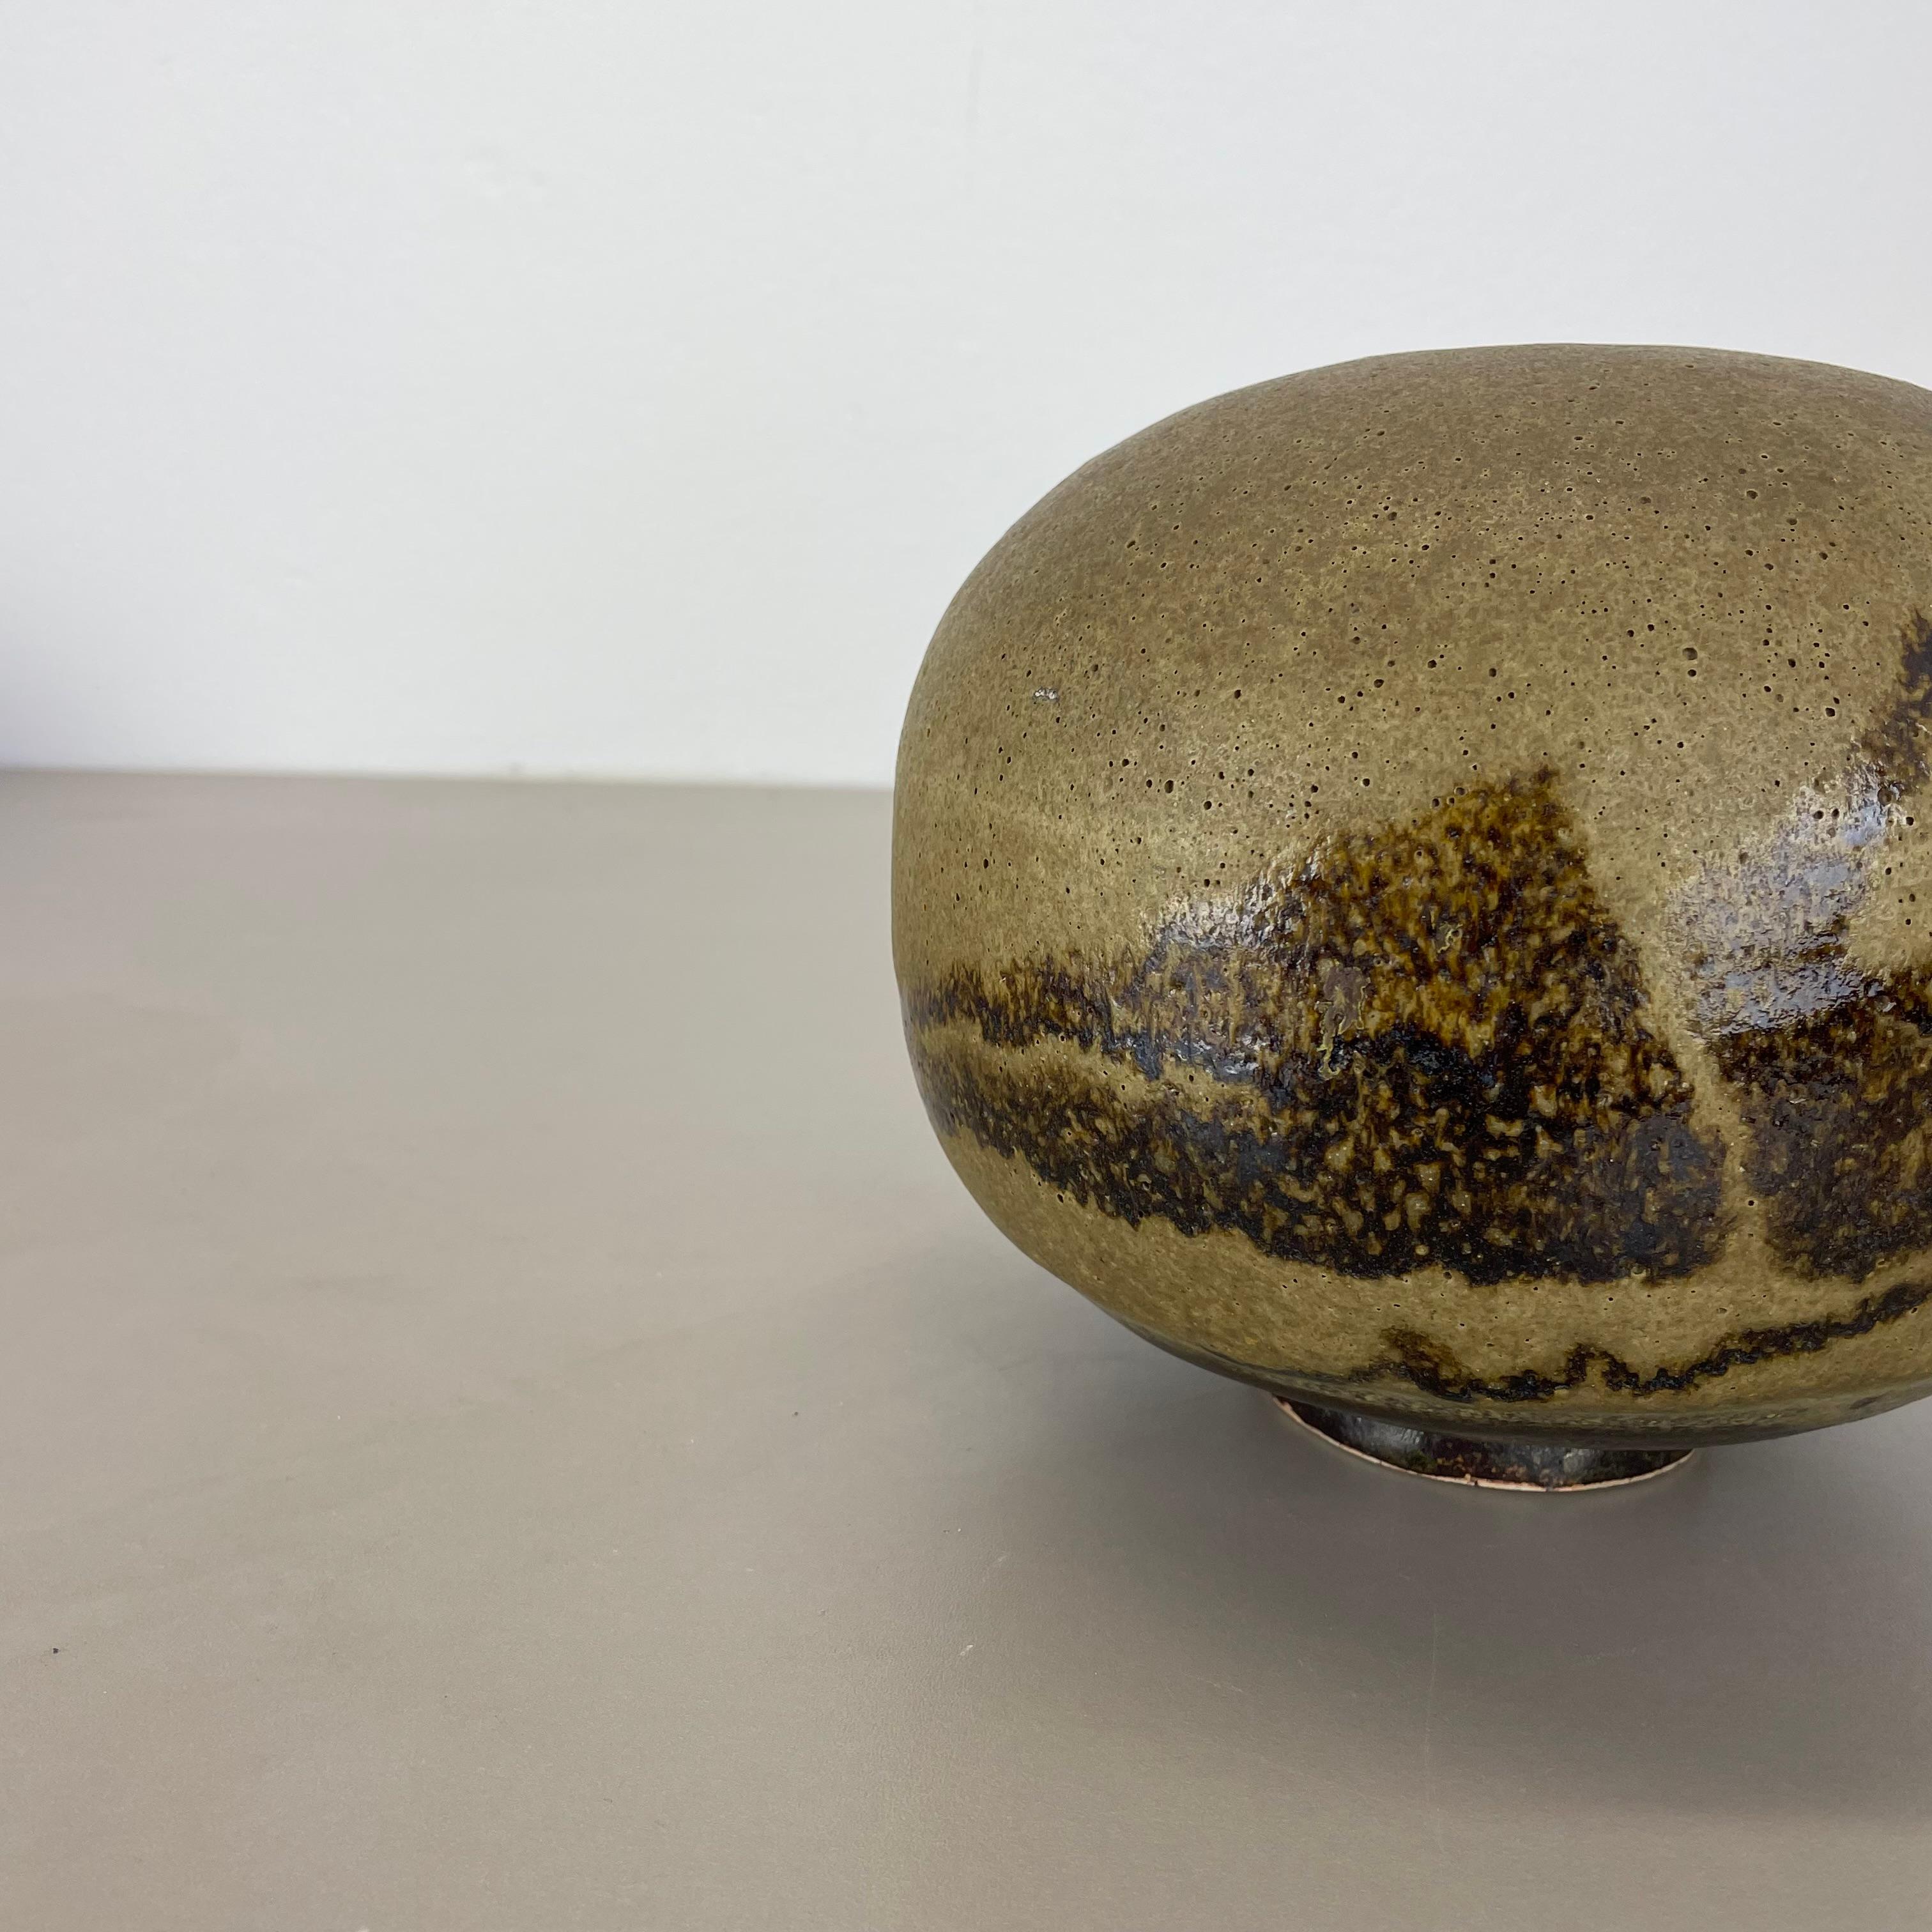 Large Sculptural Studio Pottery Vase Object by Dieter Crumbiegel, Germany, 1980s For Sale 3